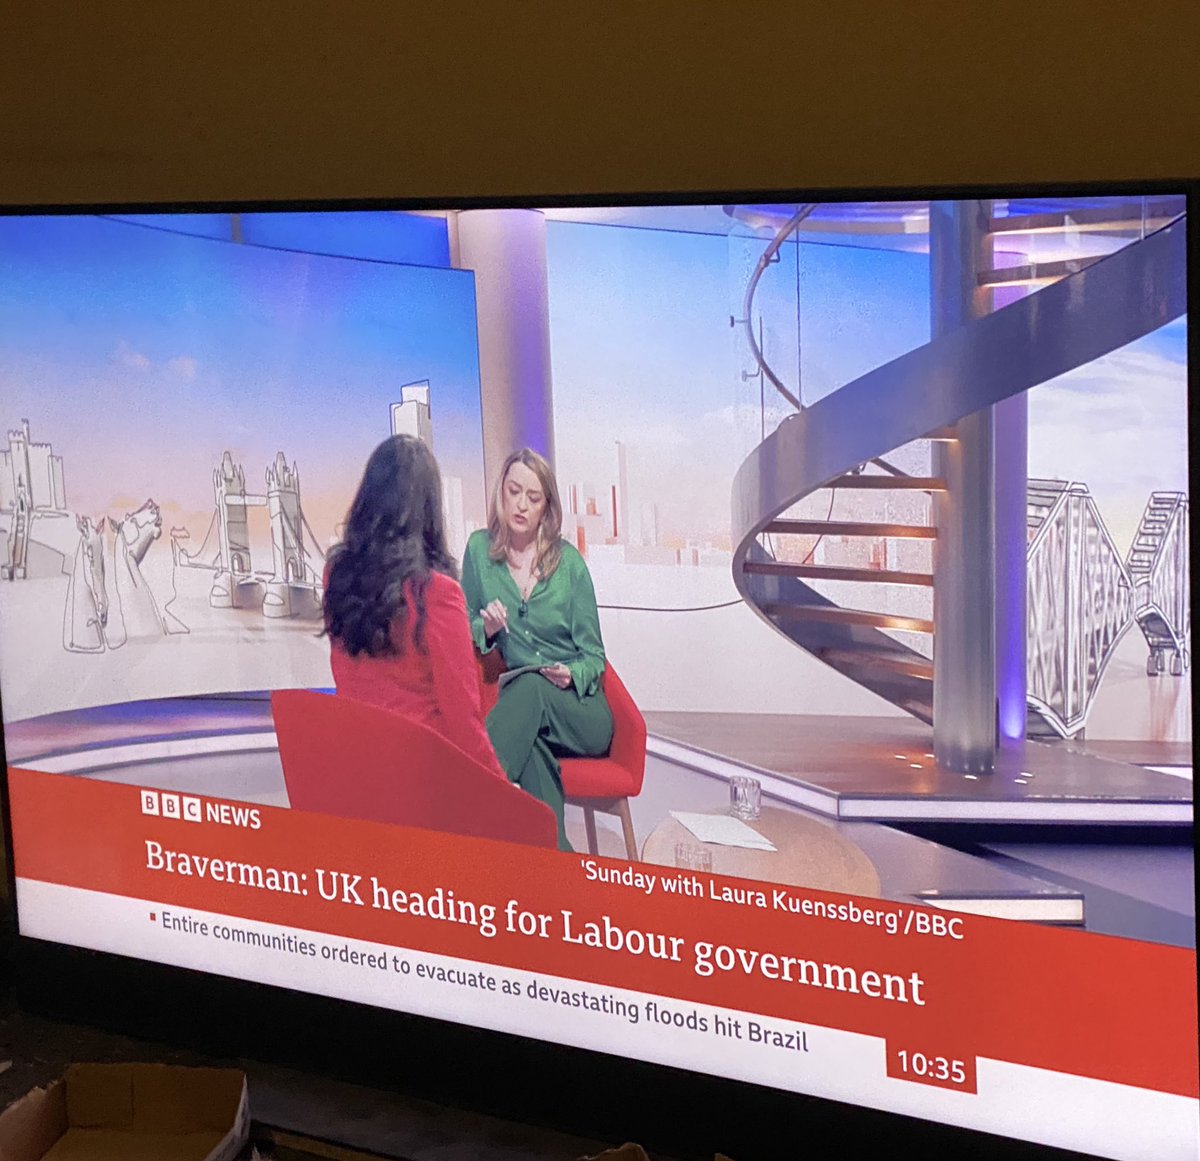 Suella Braverman thinks the UK is heading for a Labour government. Her powers of prophecy make my spine tingle. How? 🥺